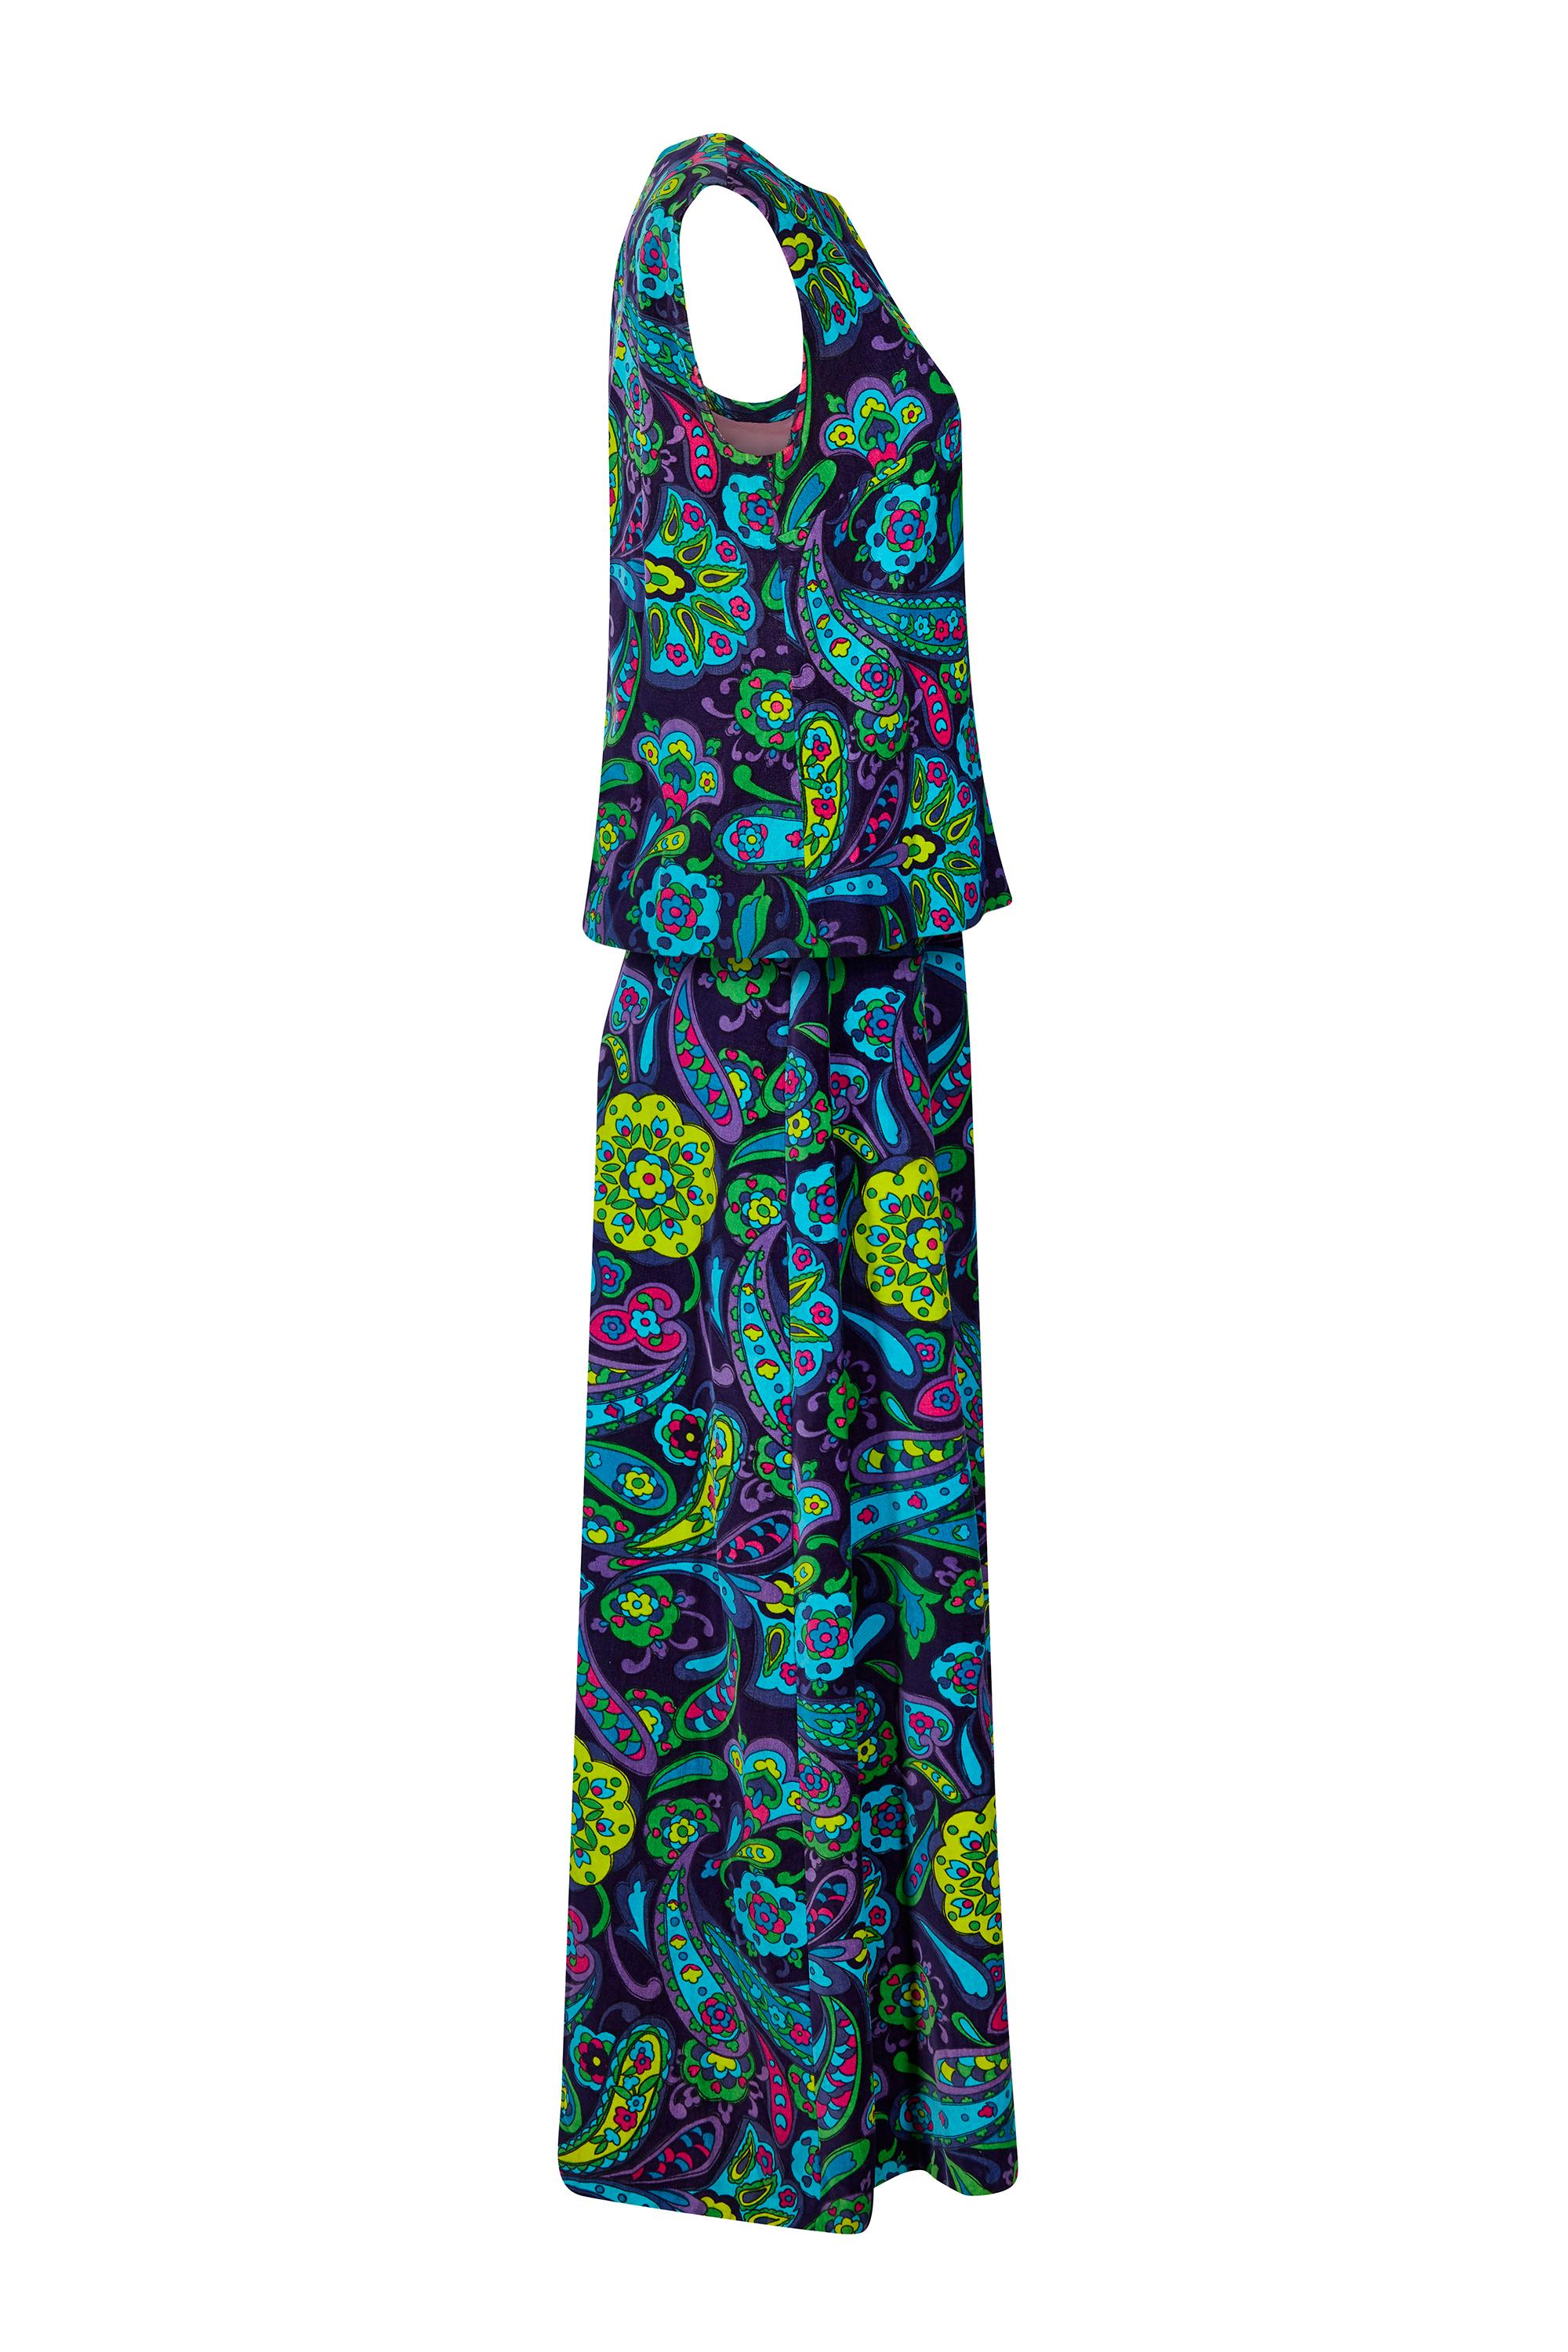 This vibrant 1960s cotton velvet ensemble comprises of an ankle length maxi skirt and sleeveless top in a flamboyant psychedelic paisley print design in fuchsia, turquoise, lime green and lilac on a deep indigo background. The set is unlabelled and